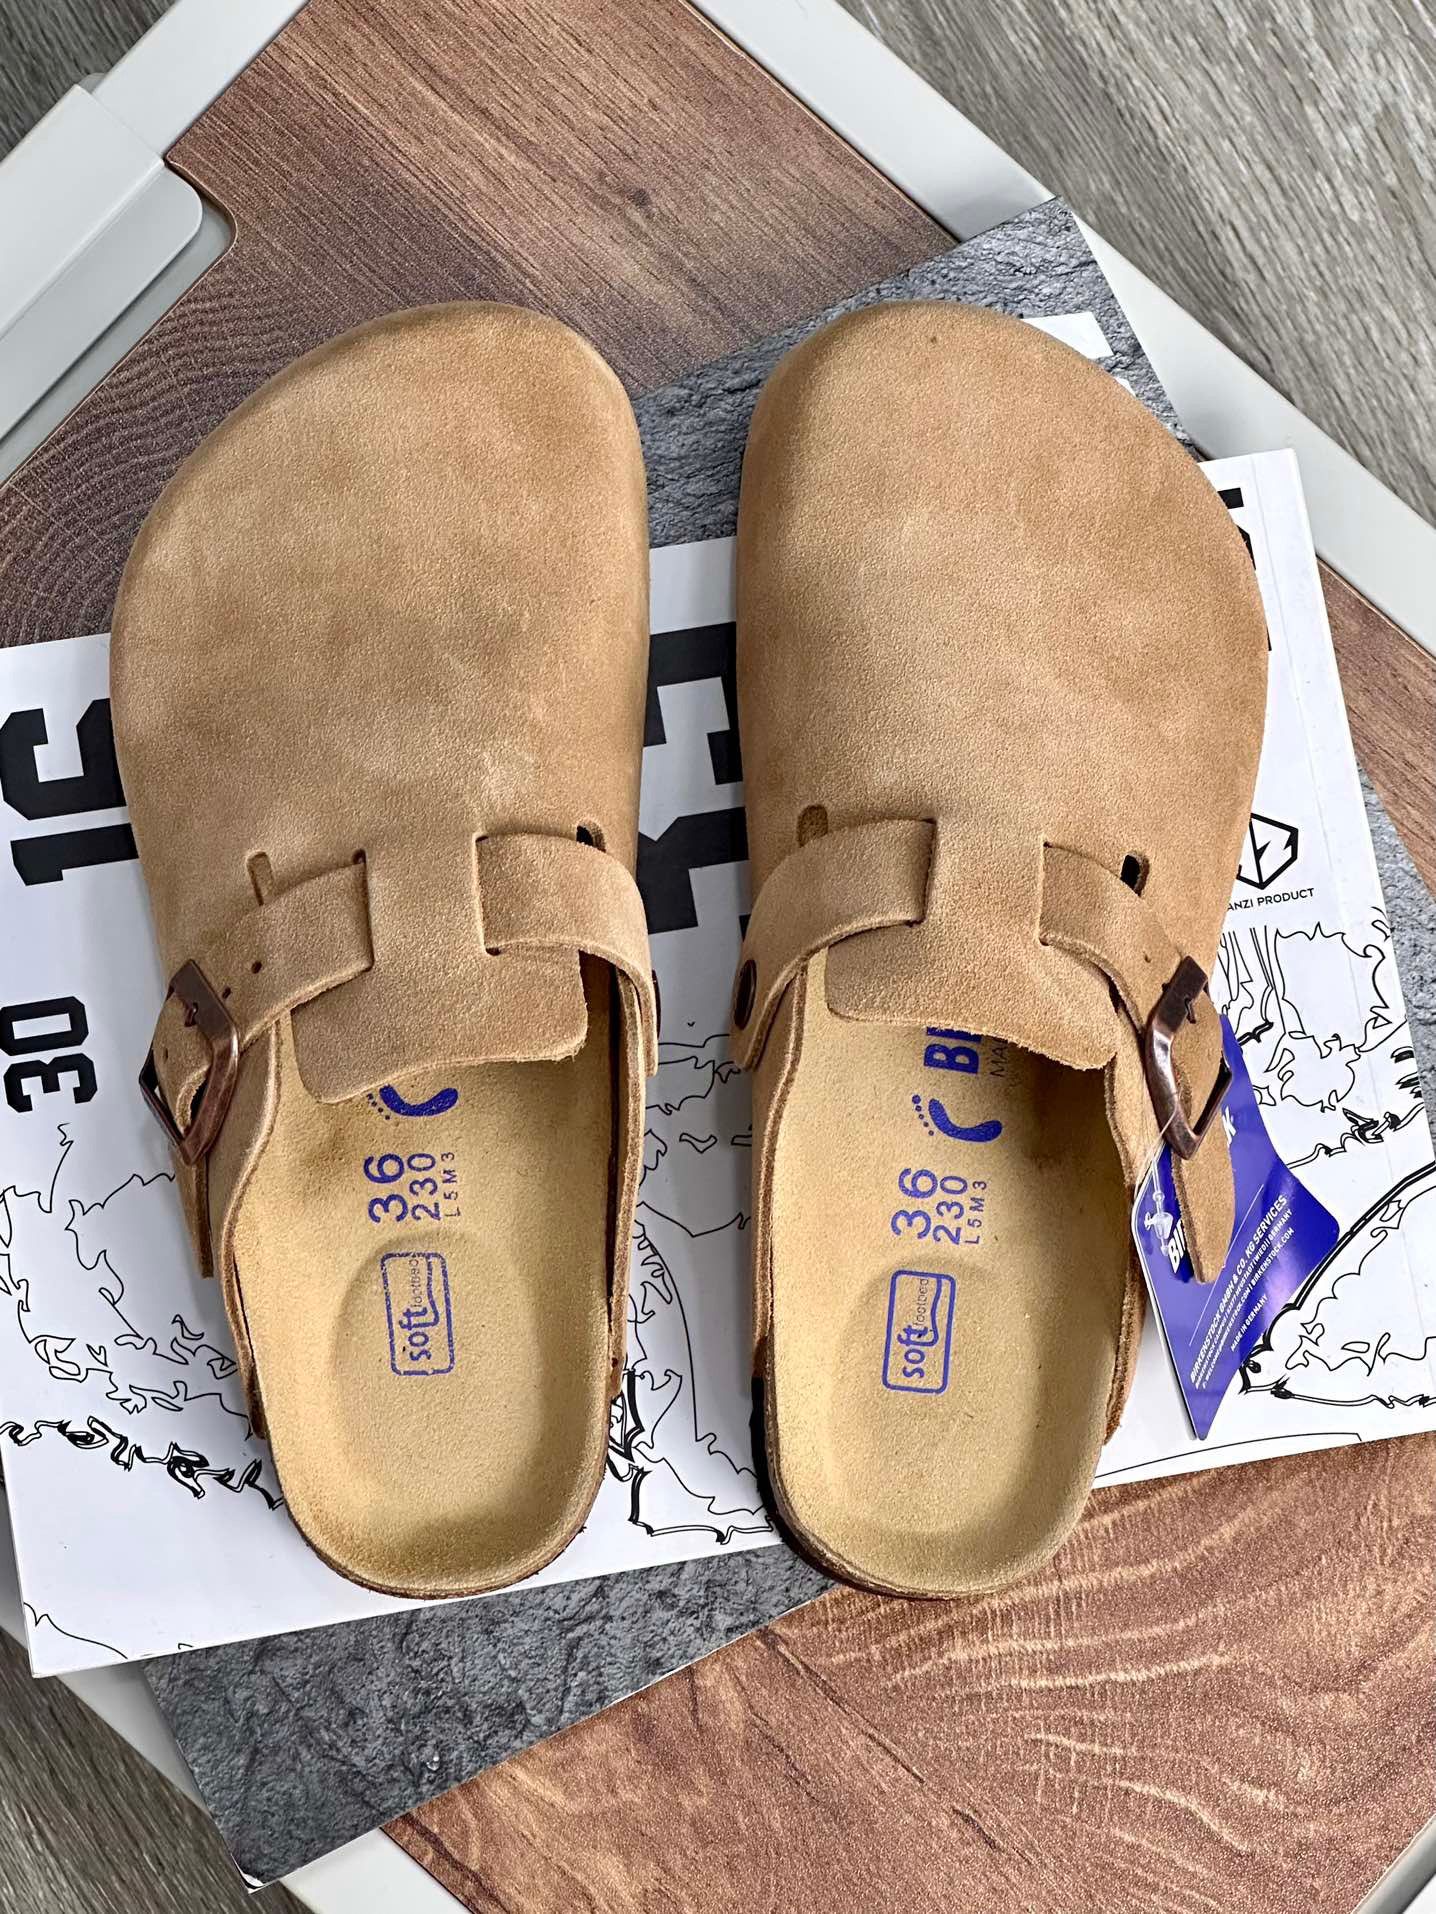 Palm Slippers for Men Outdoor Free Shipping Suede Leather Cork